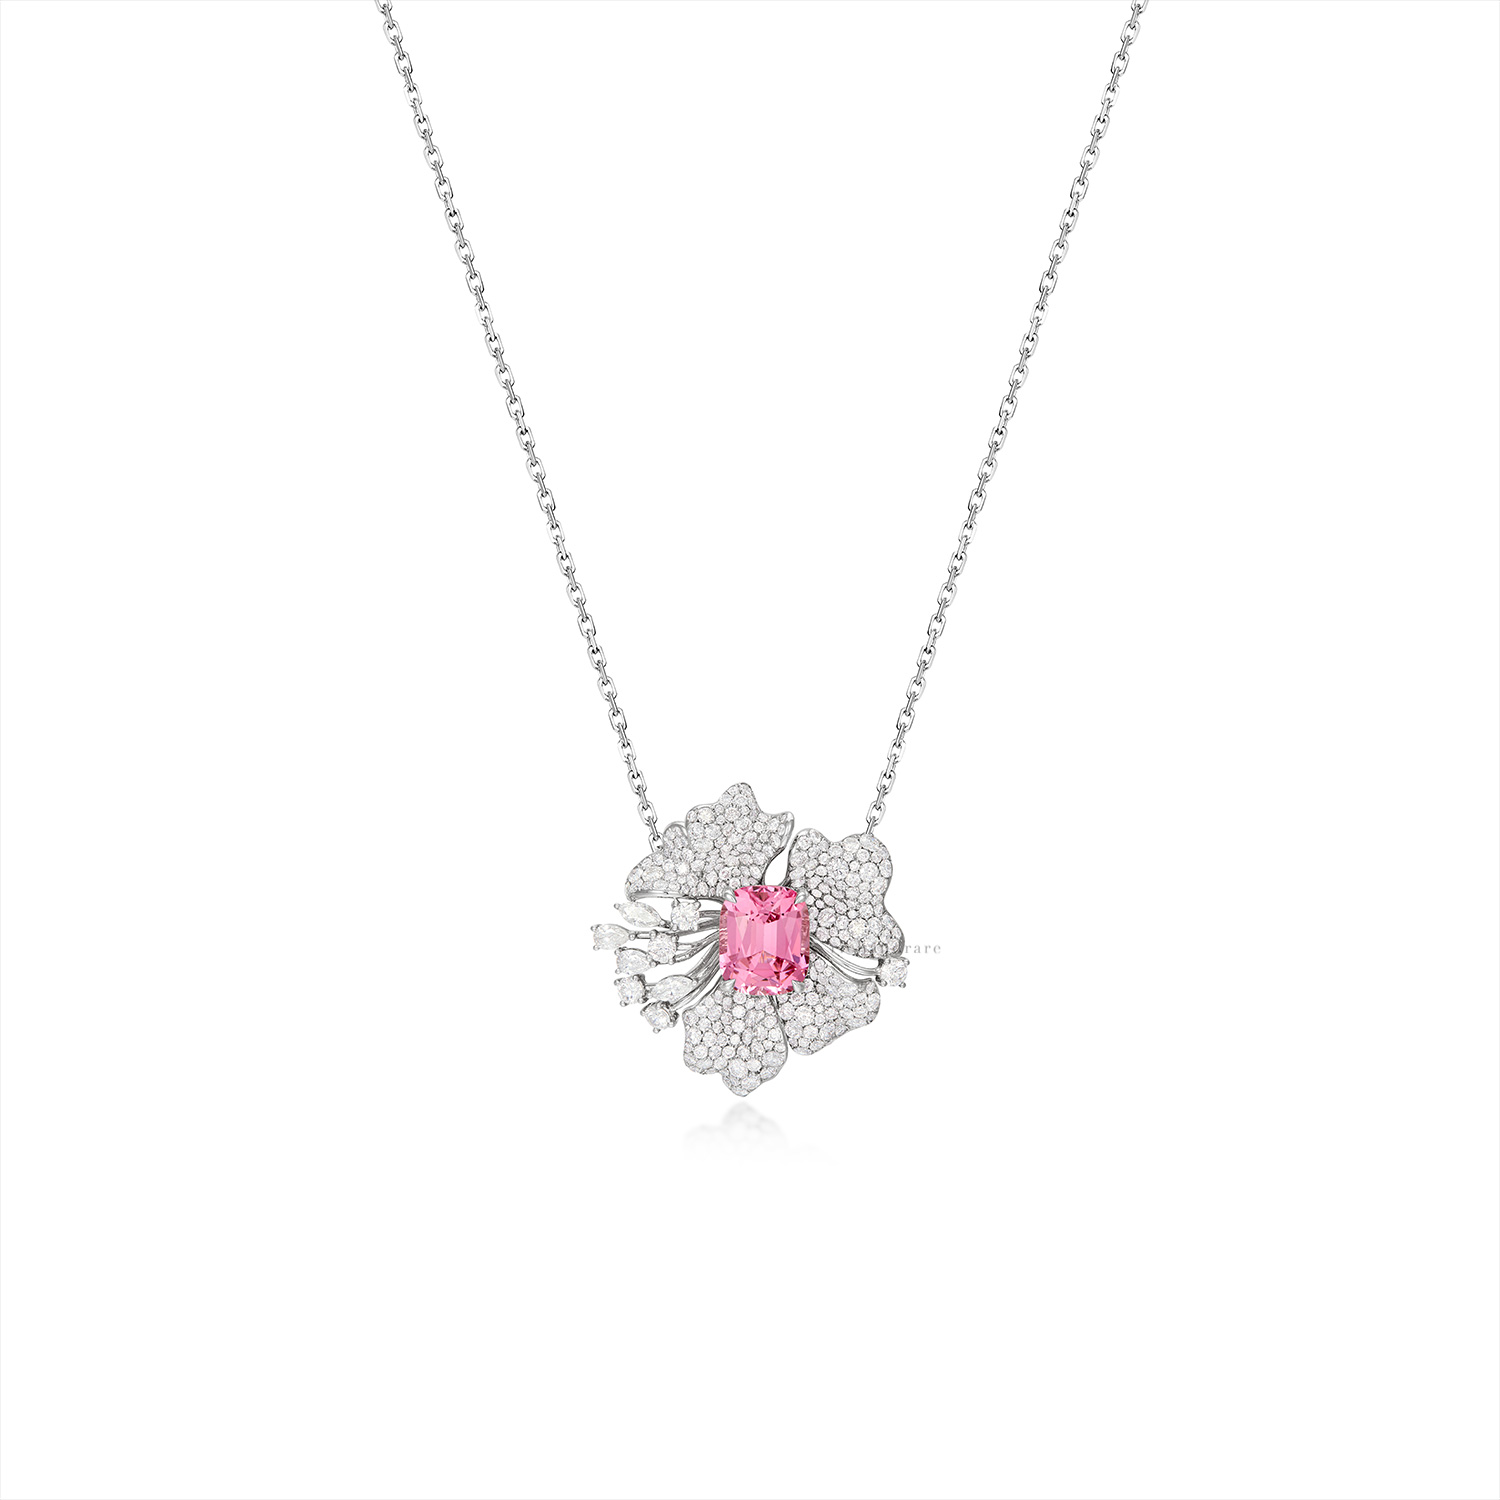 PINK SPINEL AND DIAMOND 'FLORAL' PENDENT NECKLACE